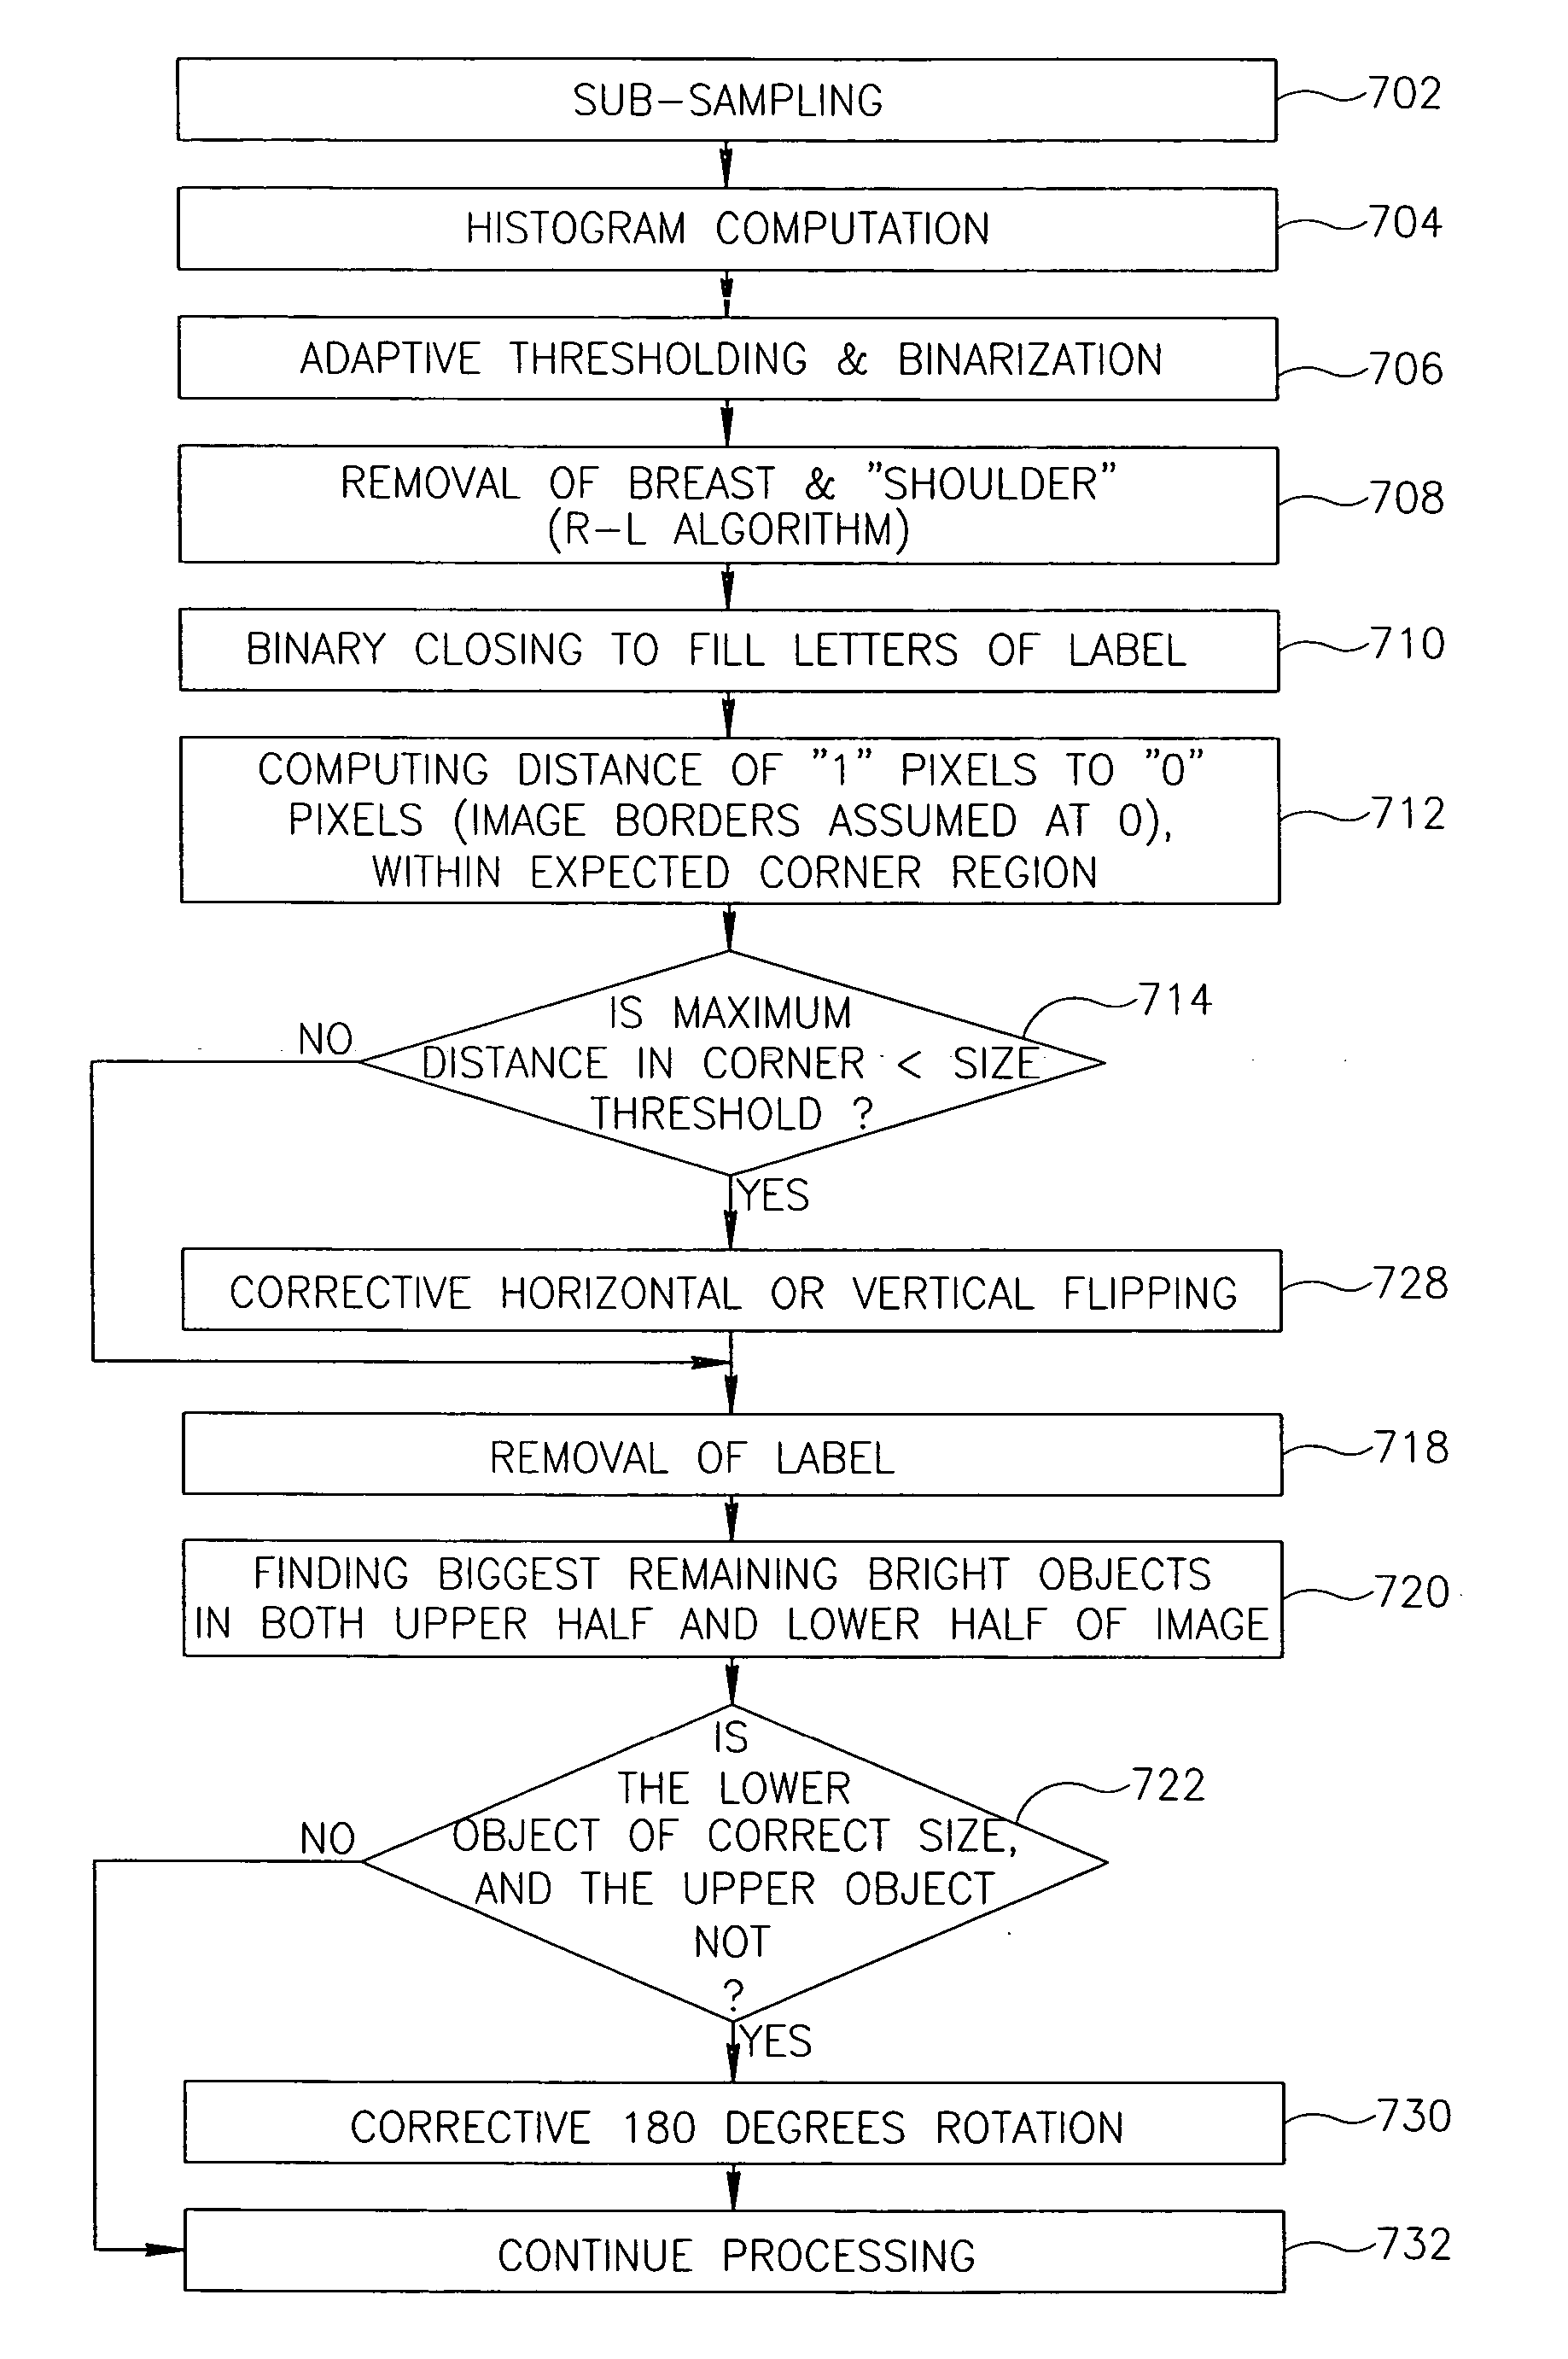 Workstation for computerized analysis in mammography and methods for use thereof